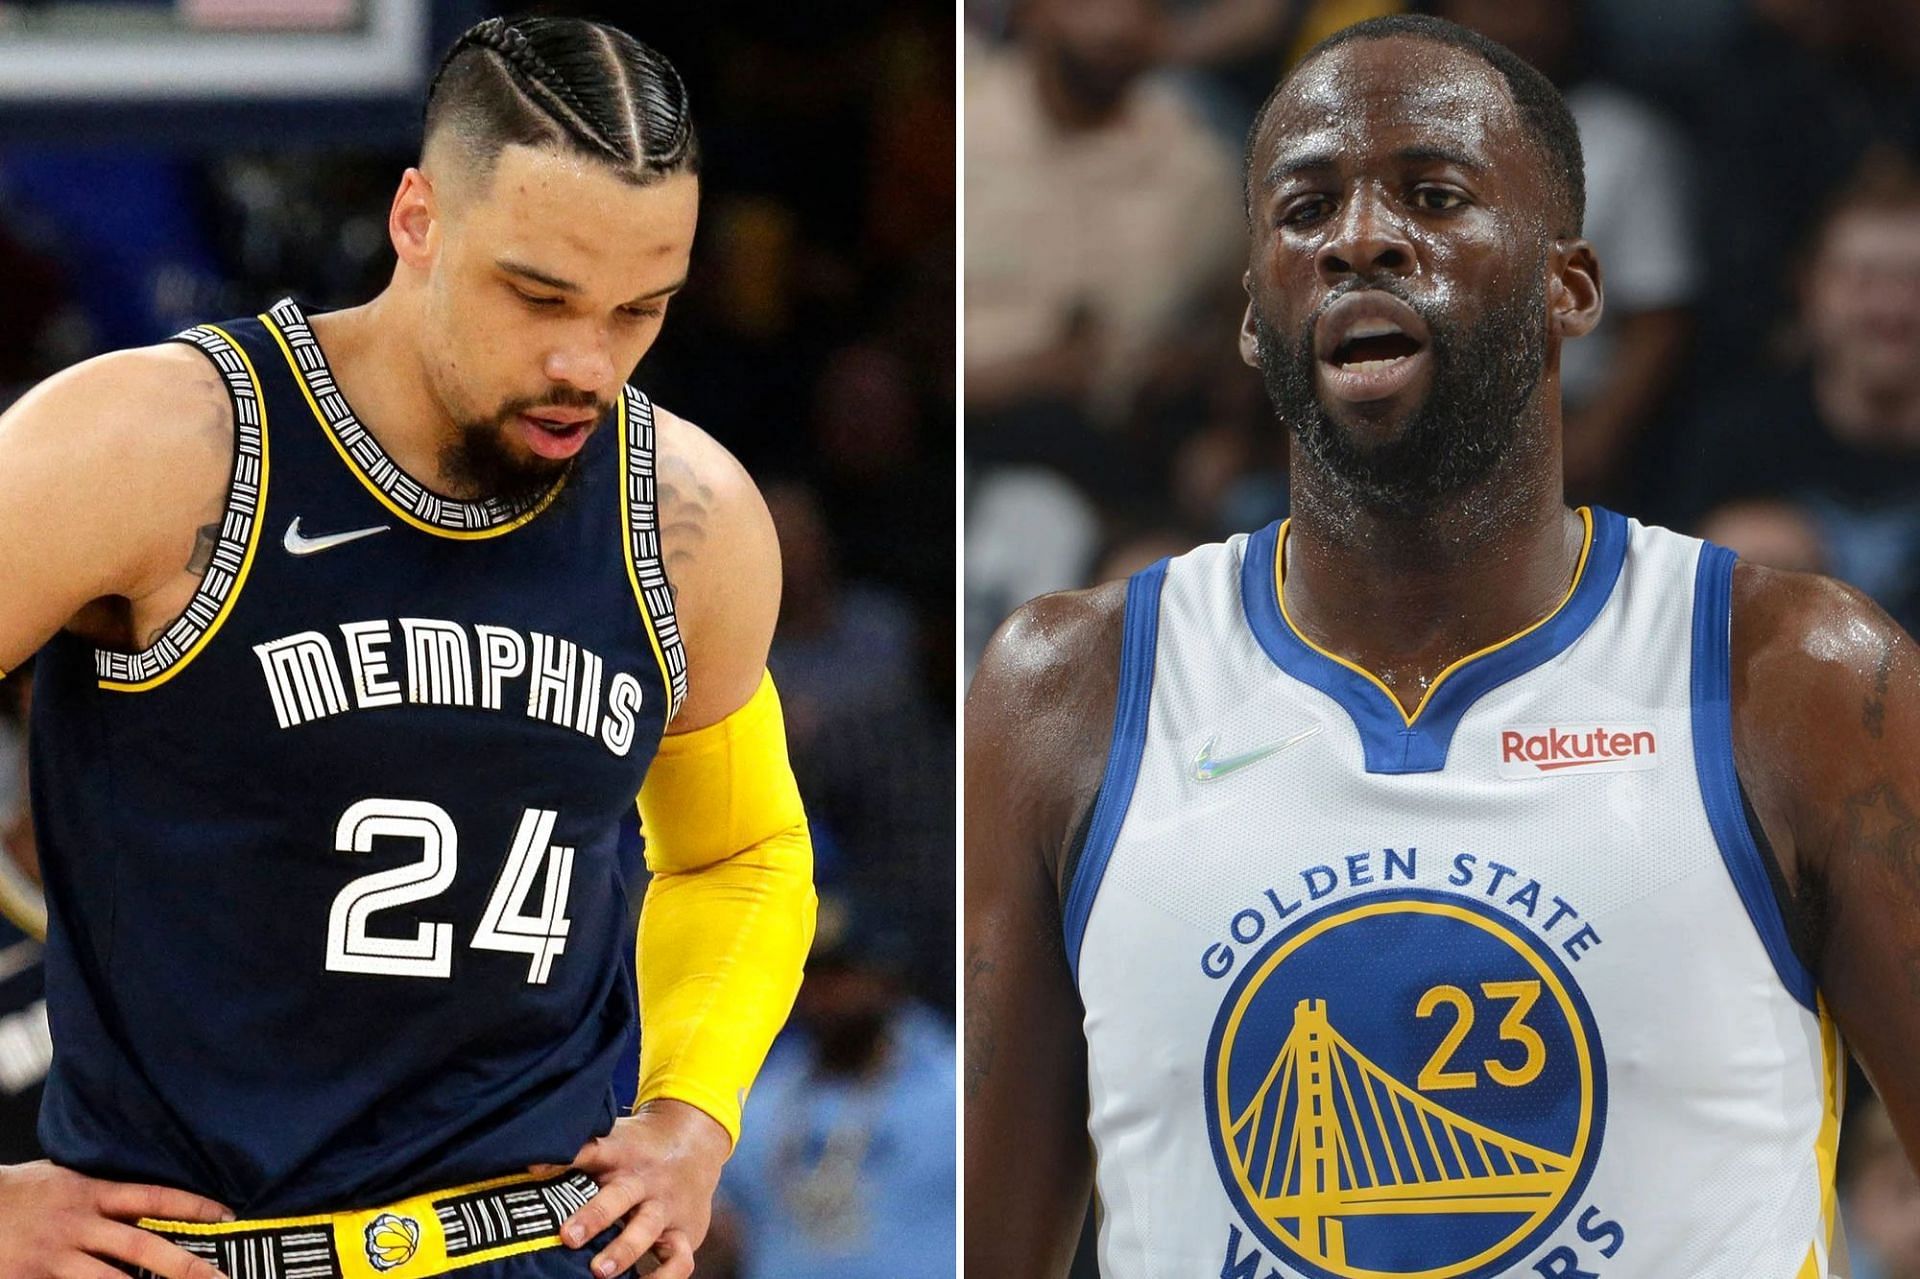 "If they wanna f**k, just say that!" - Fans can't hold it as Draymond Green,  Dillon Brooks square up and get up close on court, hilarious memes ensue